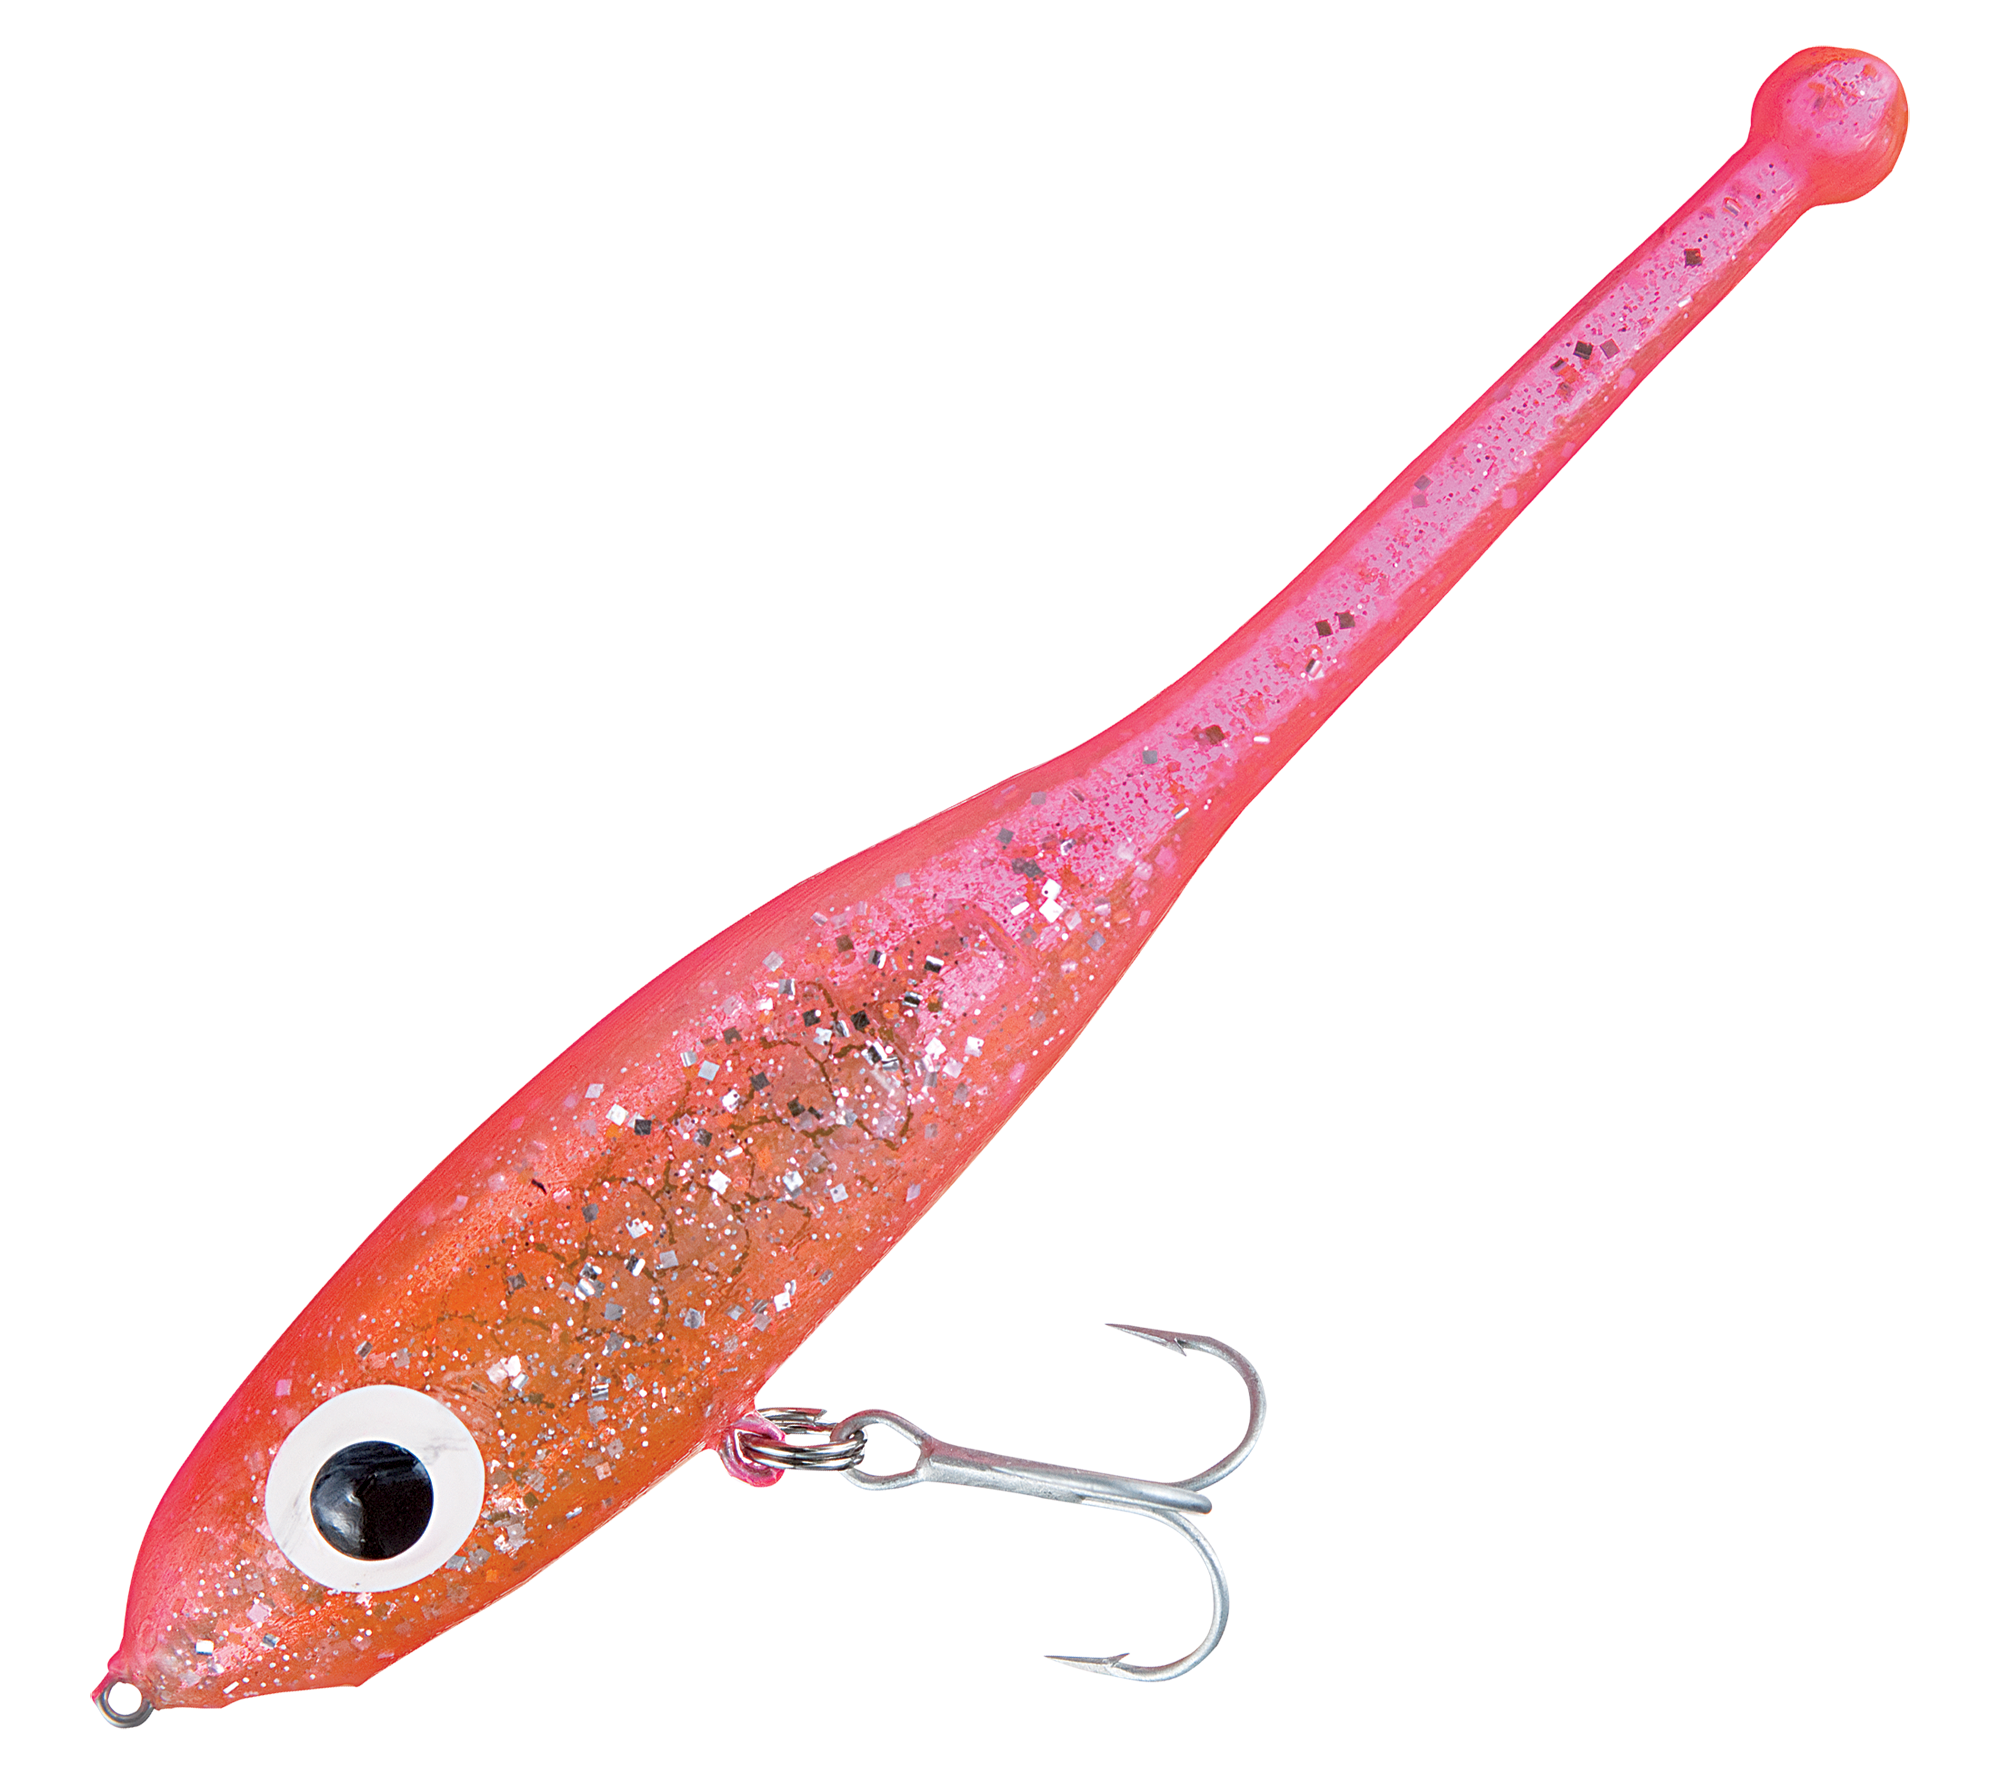 Paul Brown's Devil Soft Baits - Pink Silver